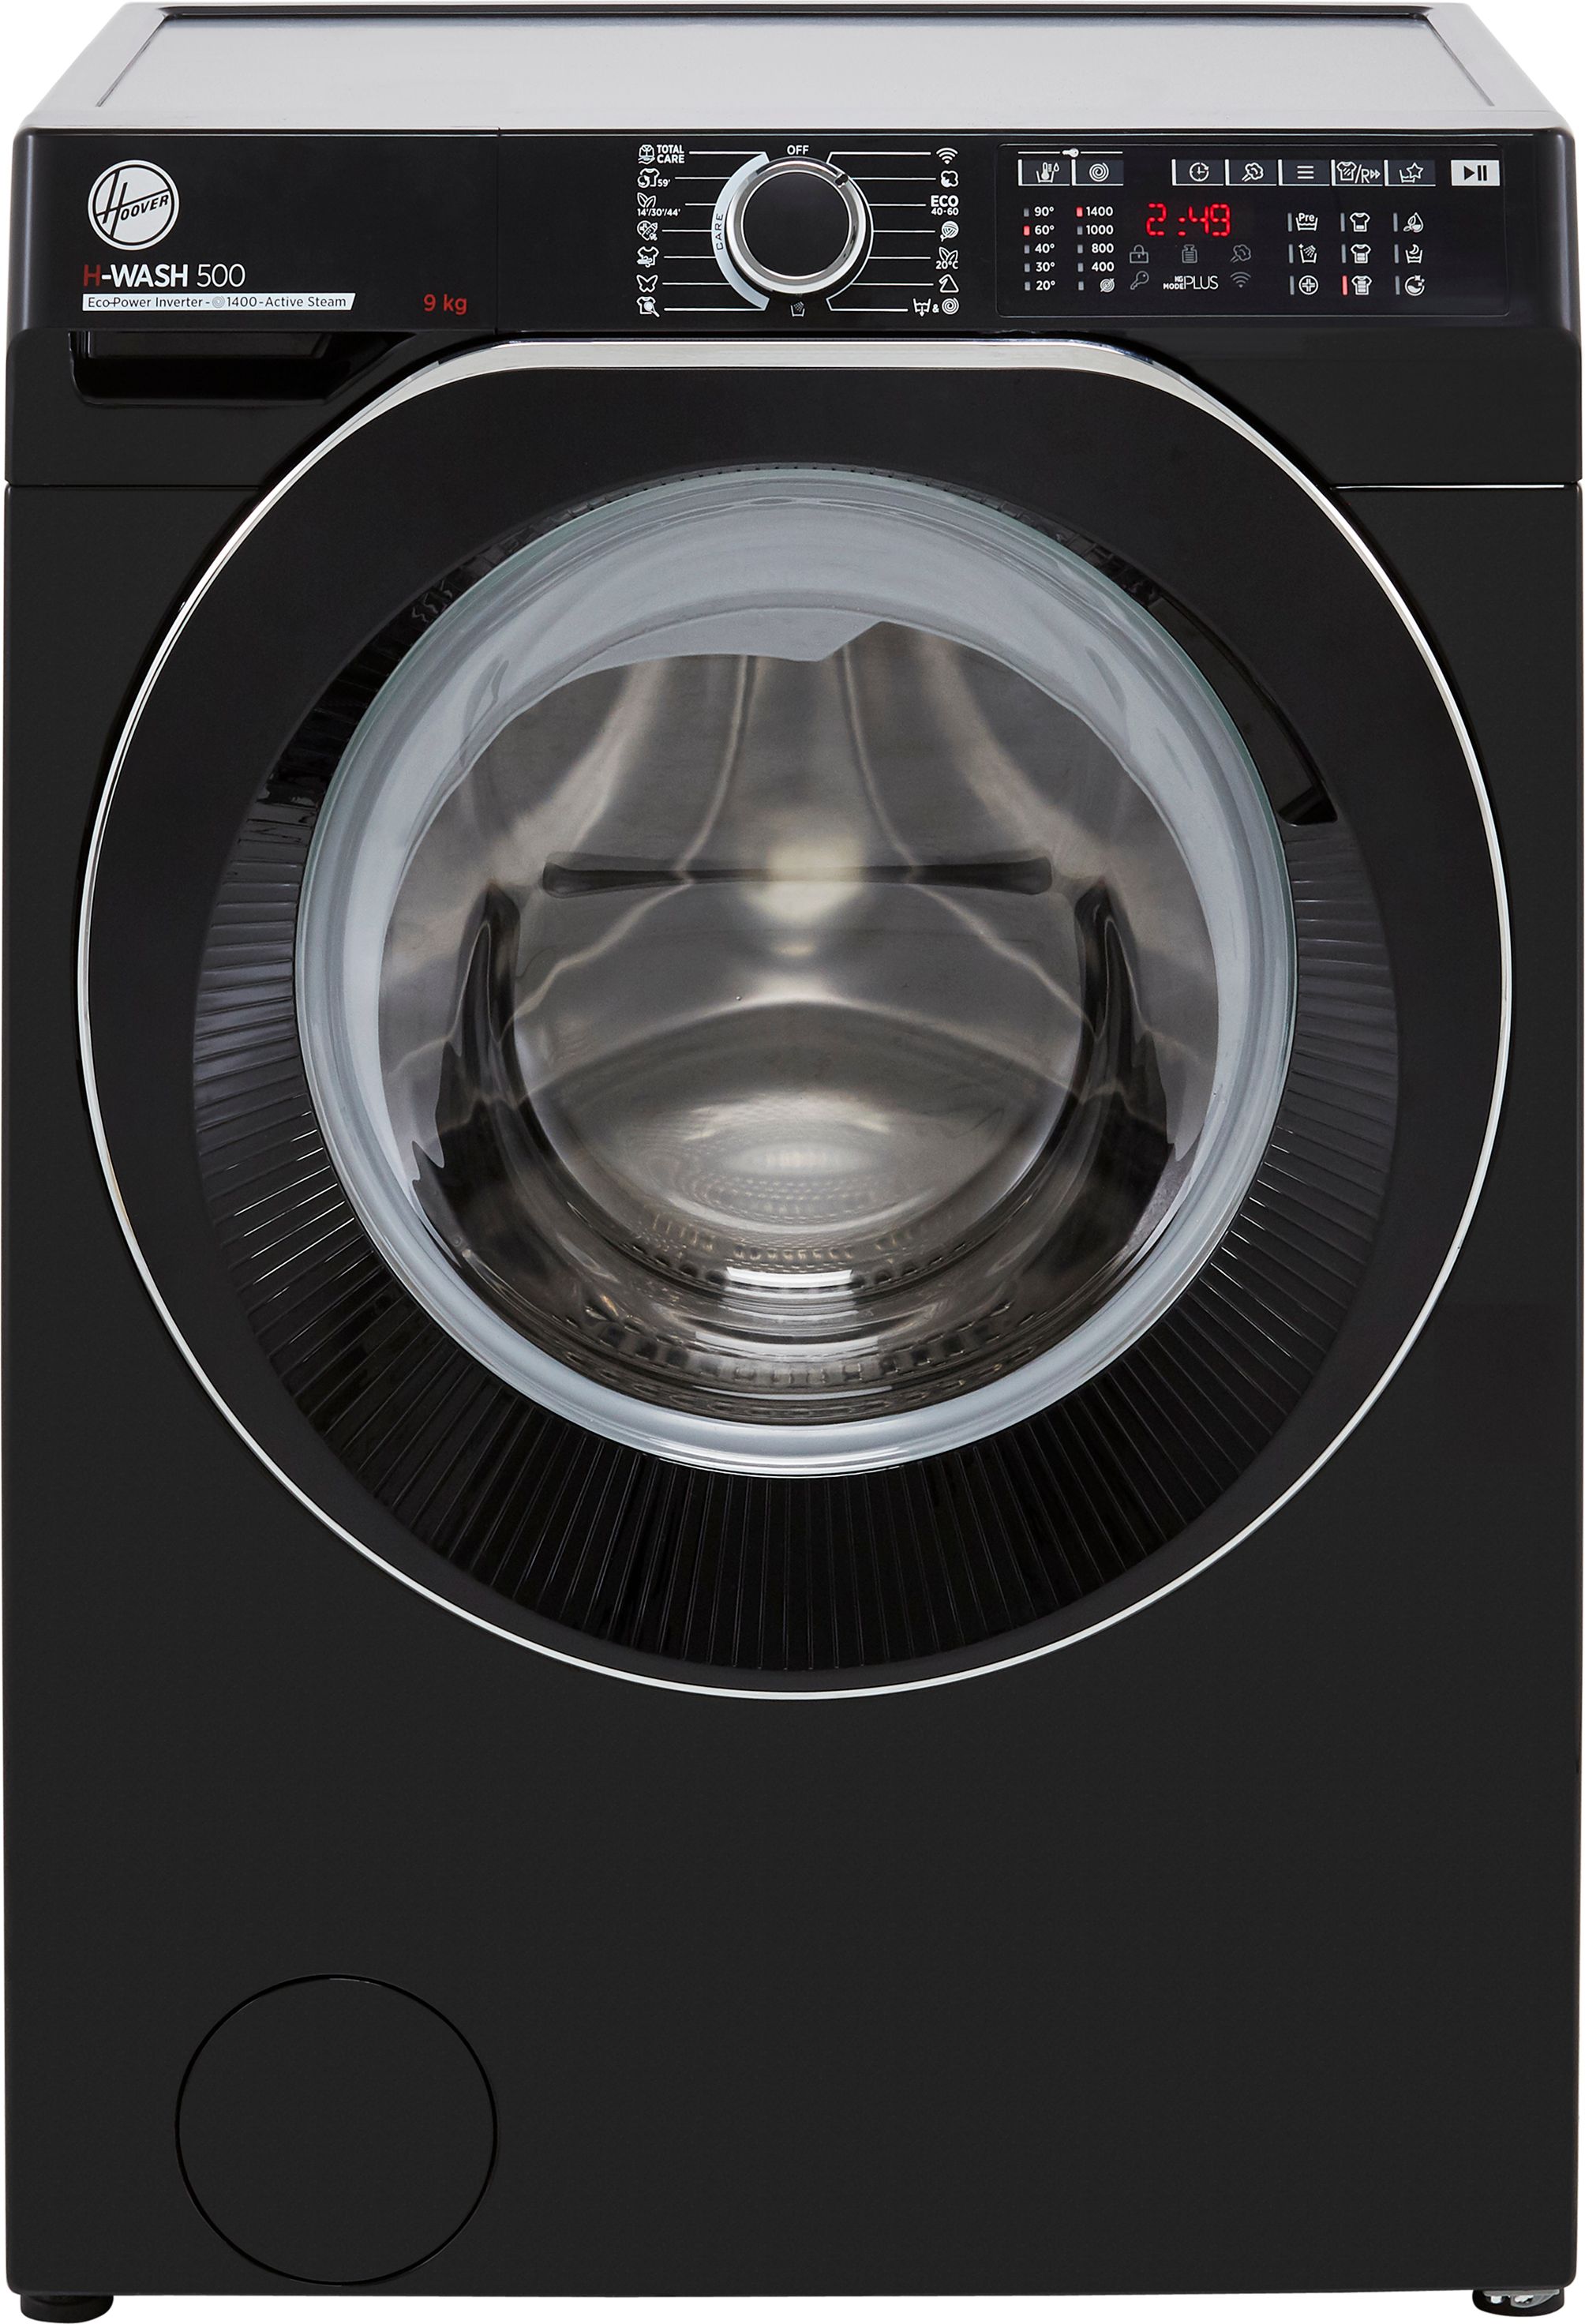 Hoover H-WASH 500 HW49AMBCB/1 9kg Washing Machine with 1400 rpm - Black - A Rated, Black